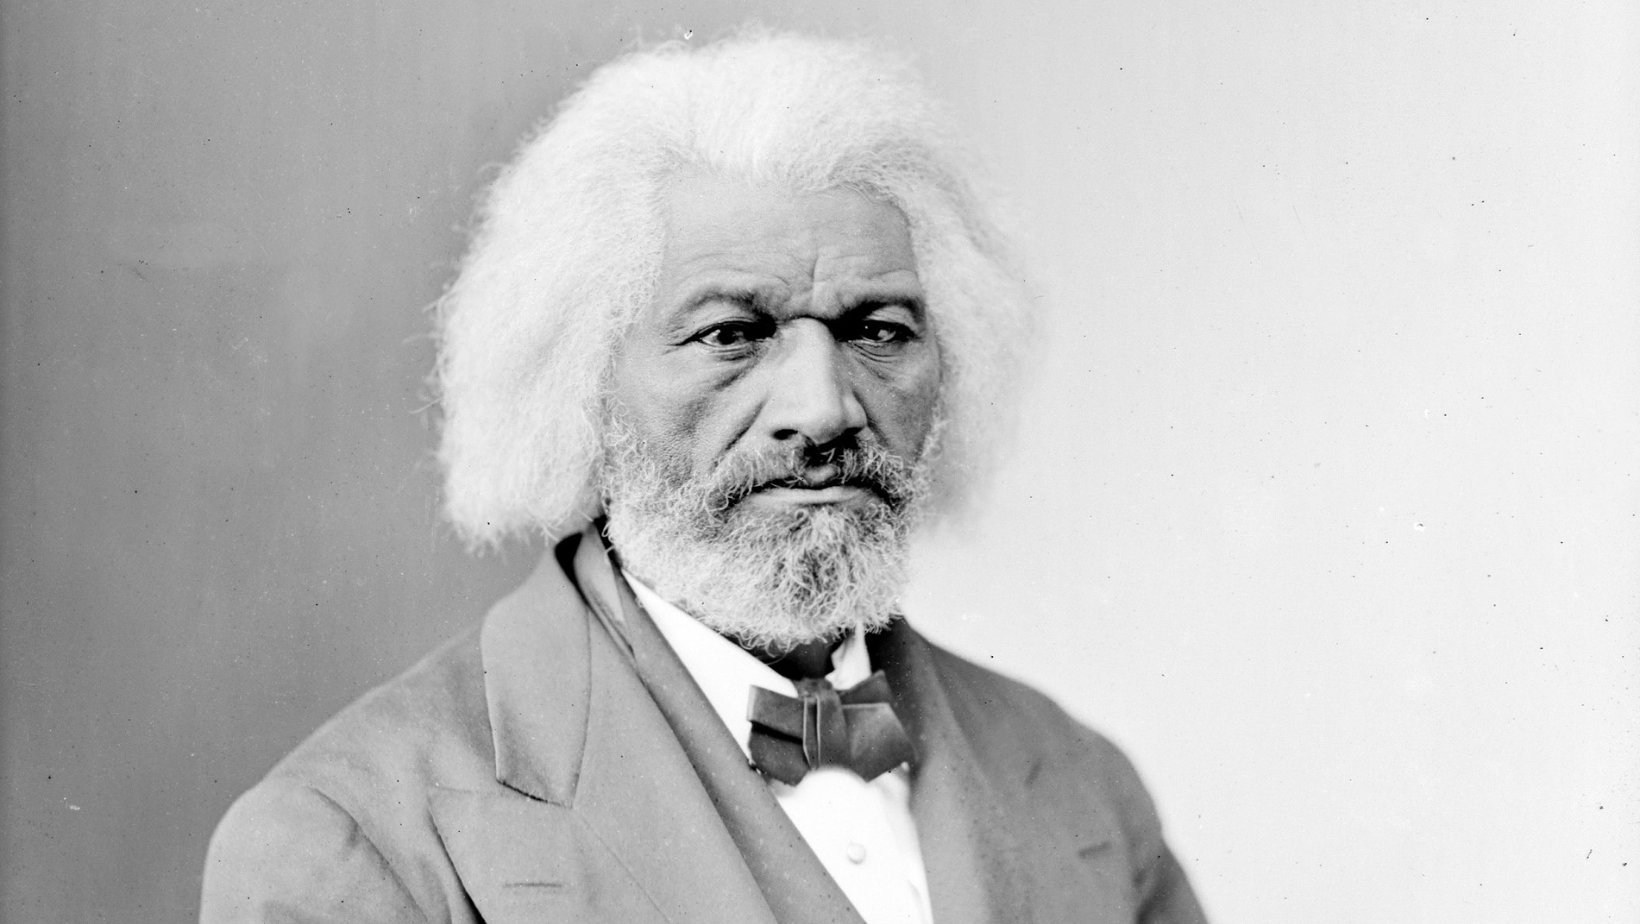 Frederick Douglass (1818-1895), African American abolitionist, writer, and statesman circa 1870s.